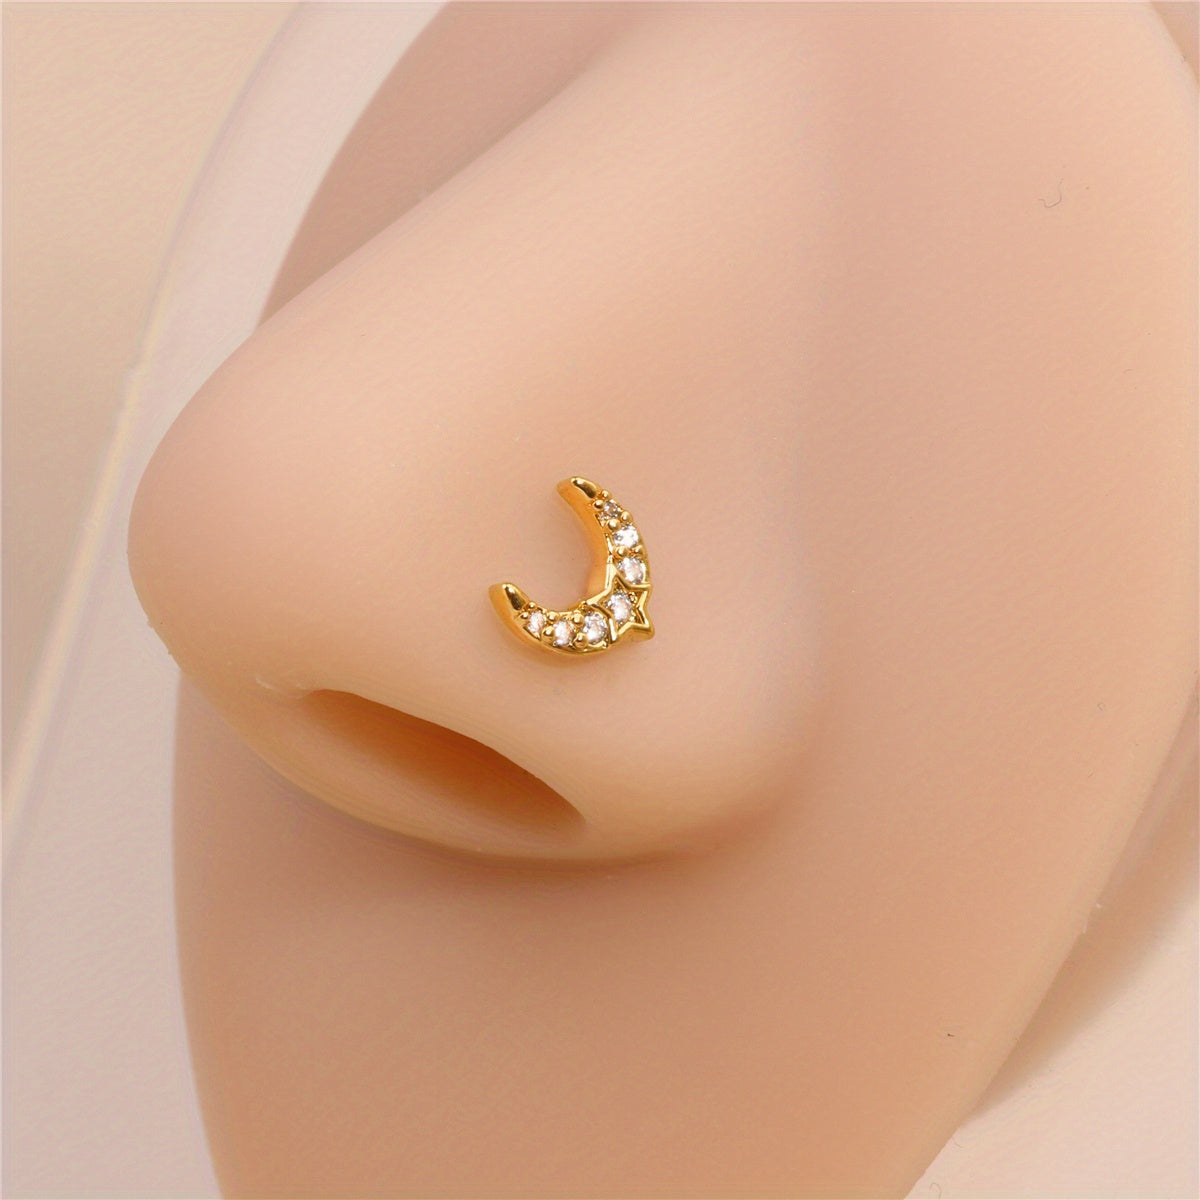 L Shaped Nose Rings Studs For Women CZ Moon Nose Piercing Jewelry